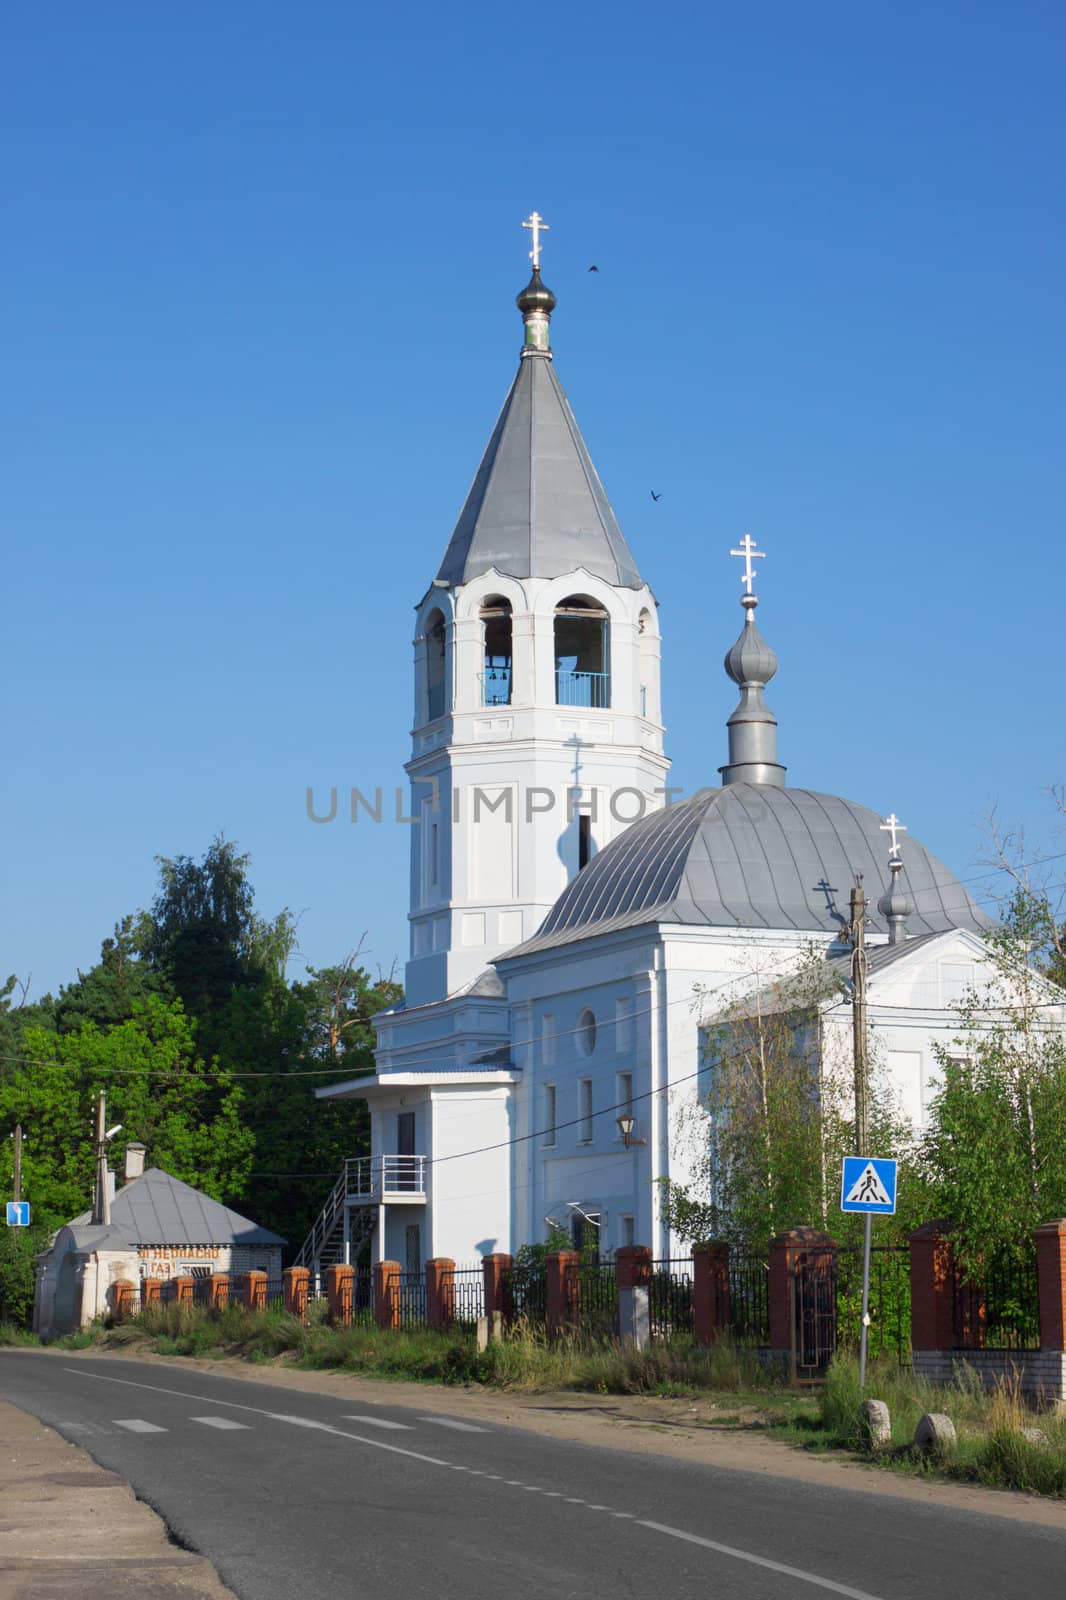 The Church of the Annunciation, built in 1816, in the city of Volodarsk. Russia